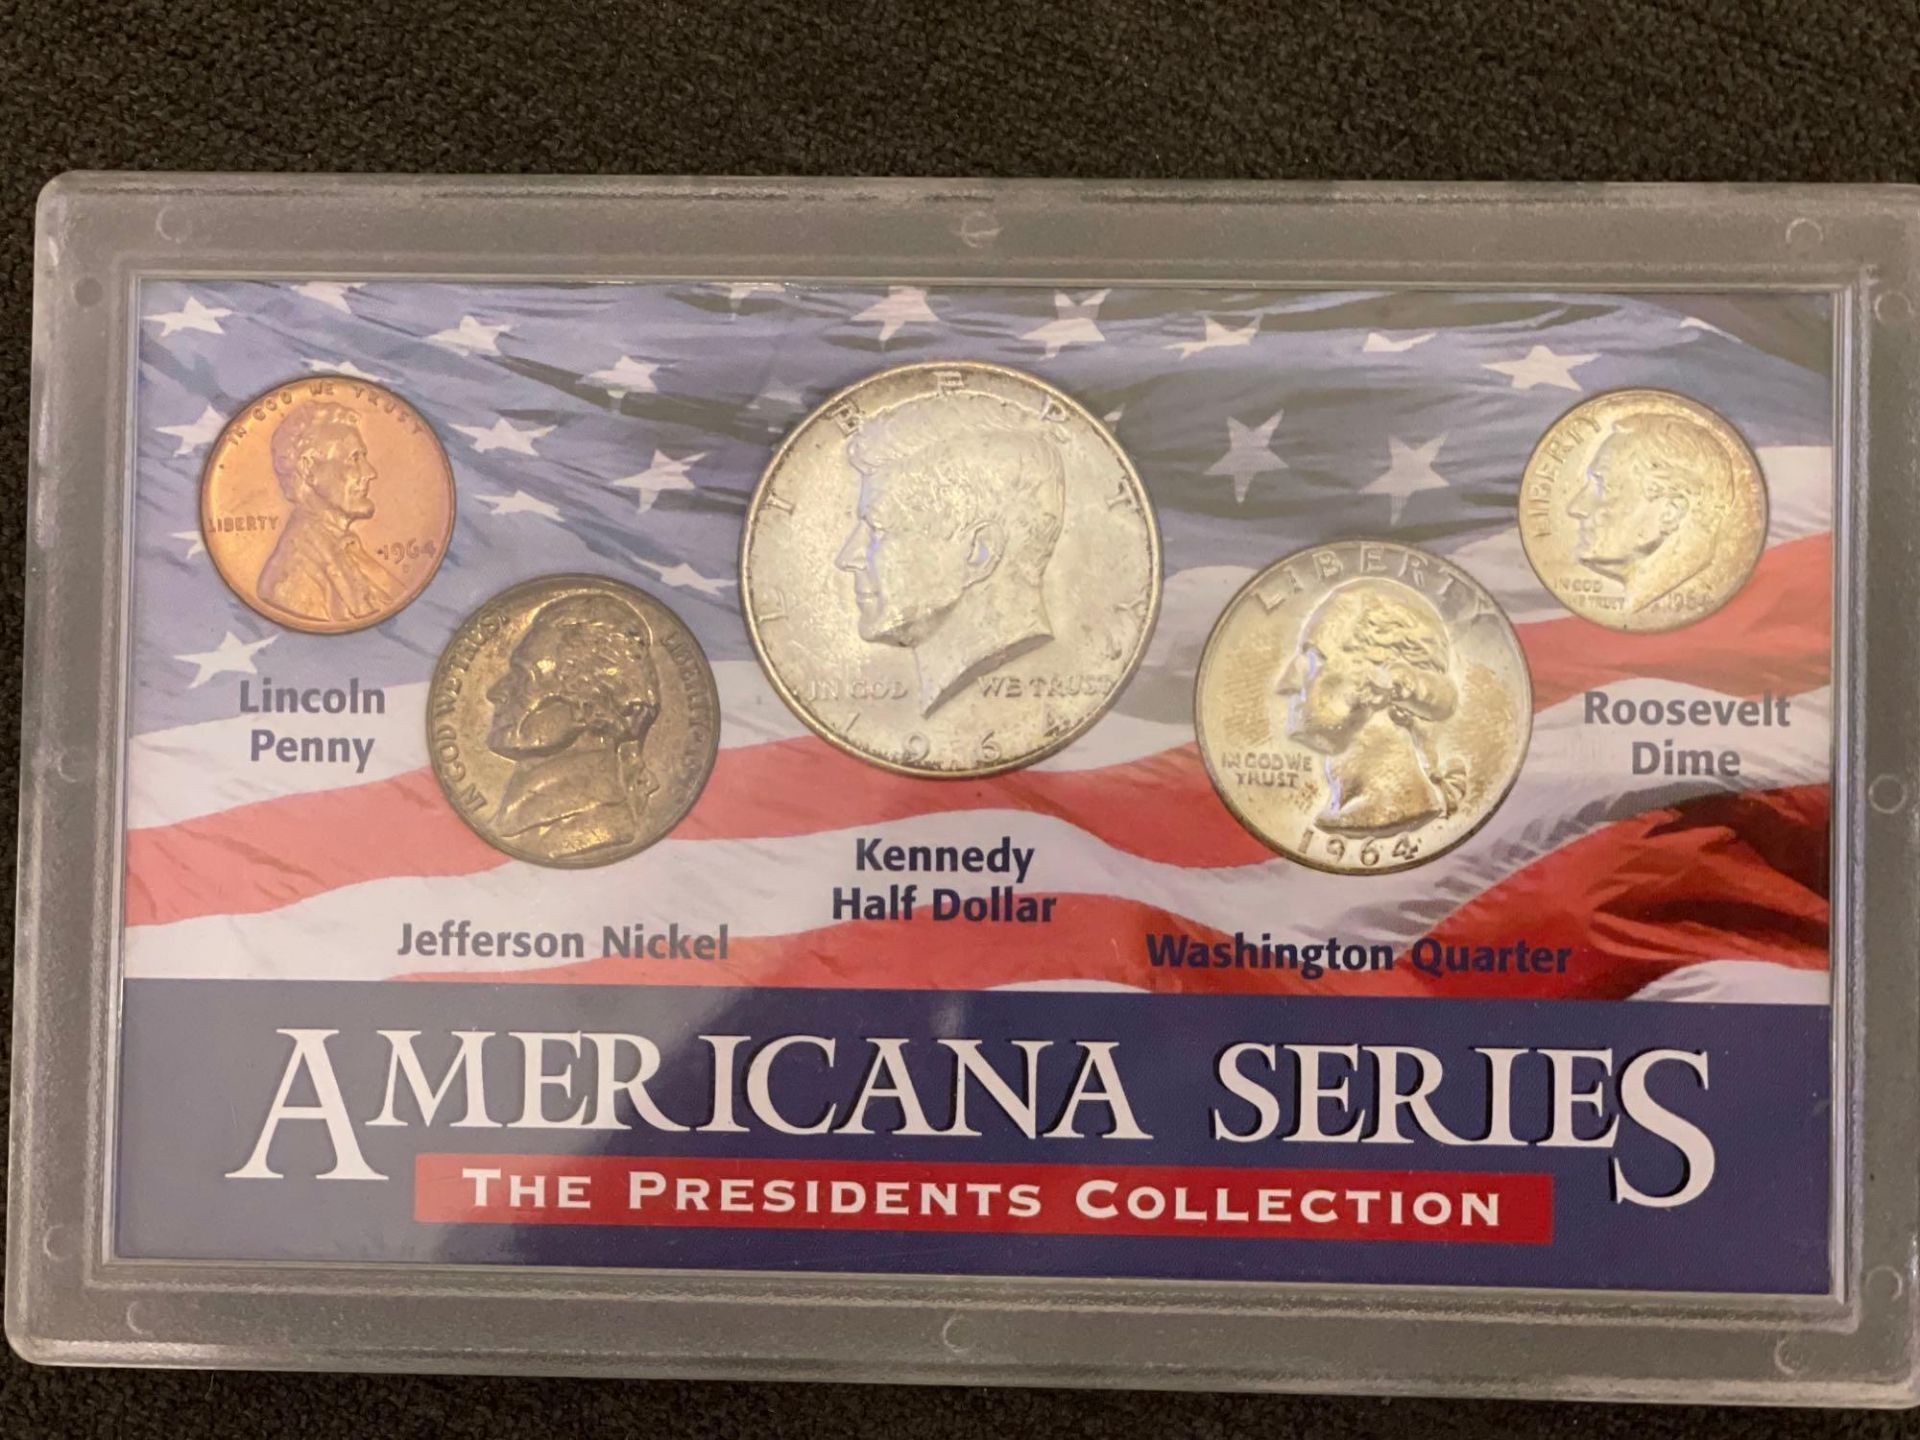 1964 Americana Series The Presidents Collection & Bicentennial Coinage 200 Years of Liberty 1776-197 - Image 2 of 5